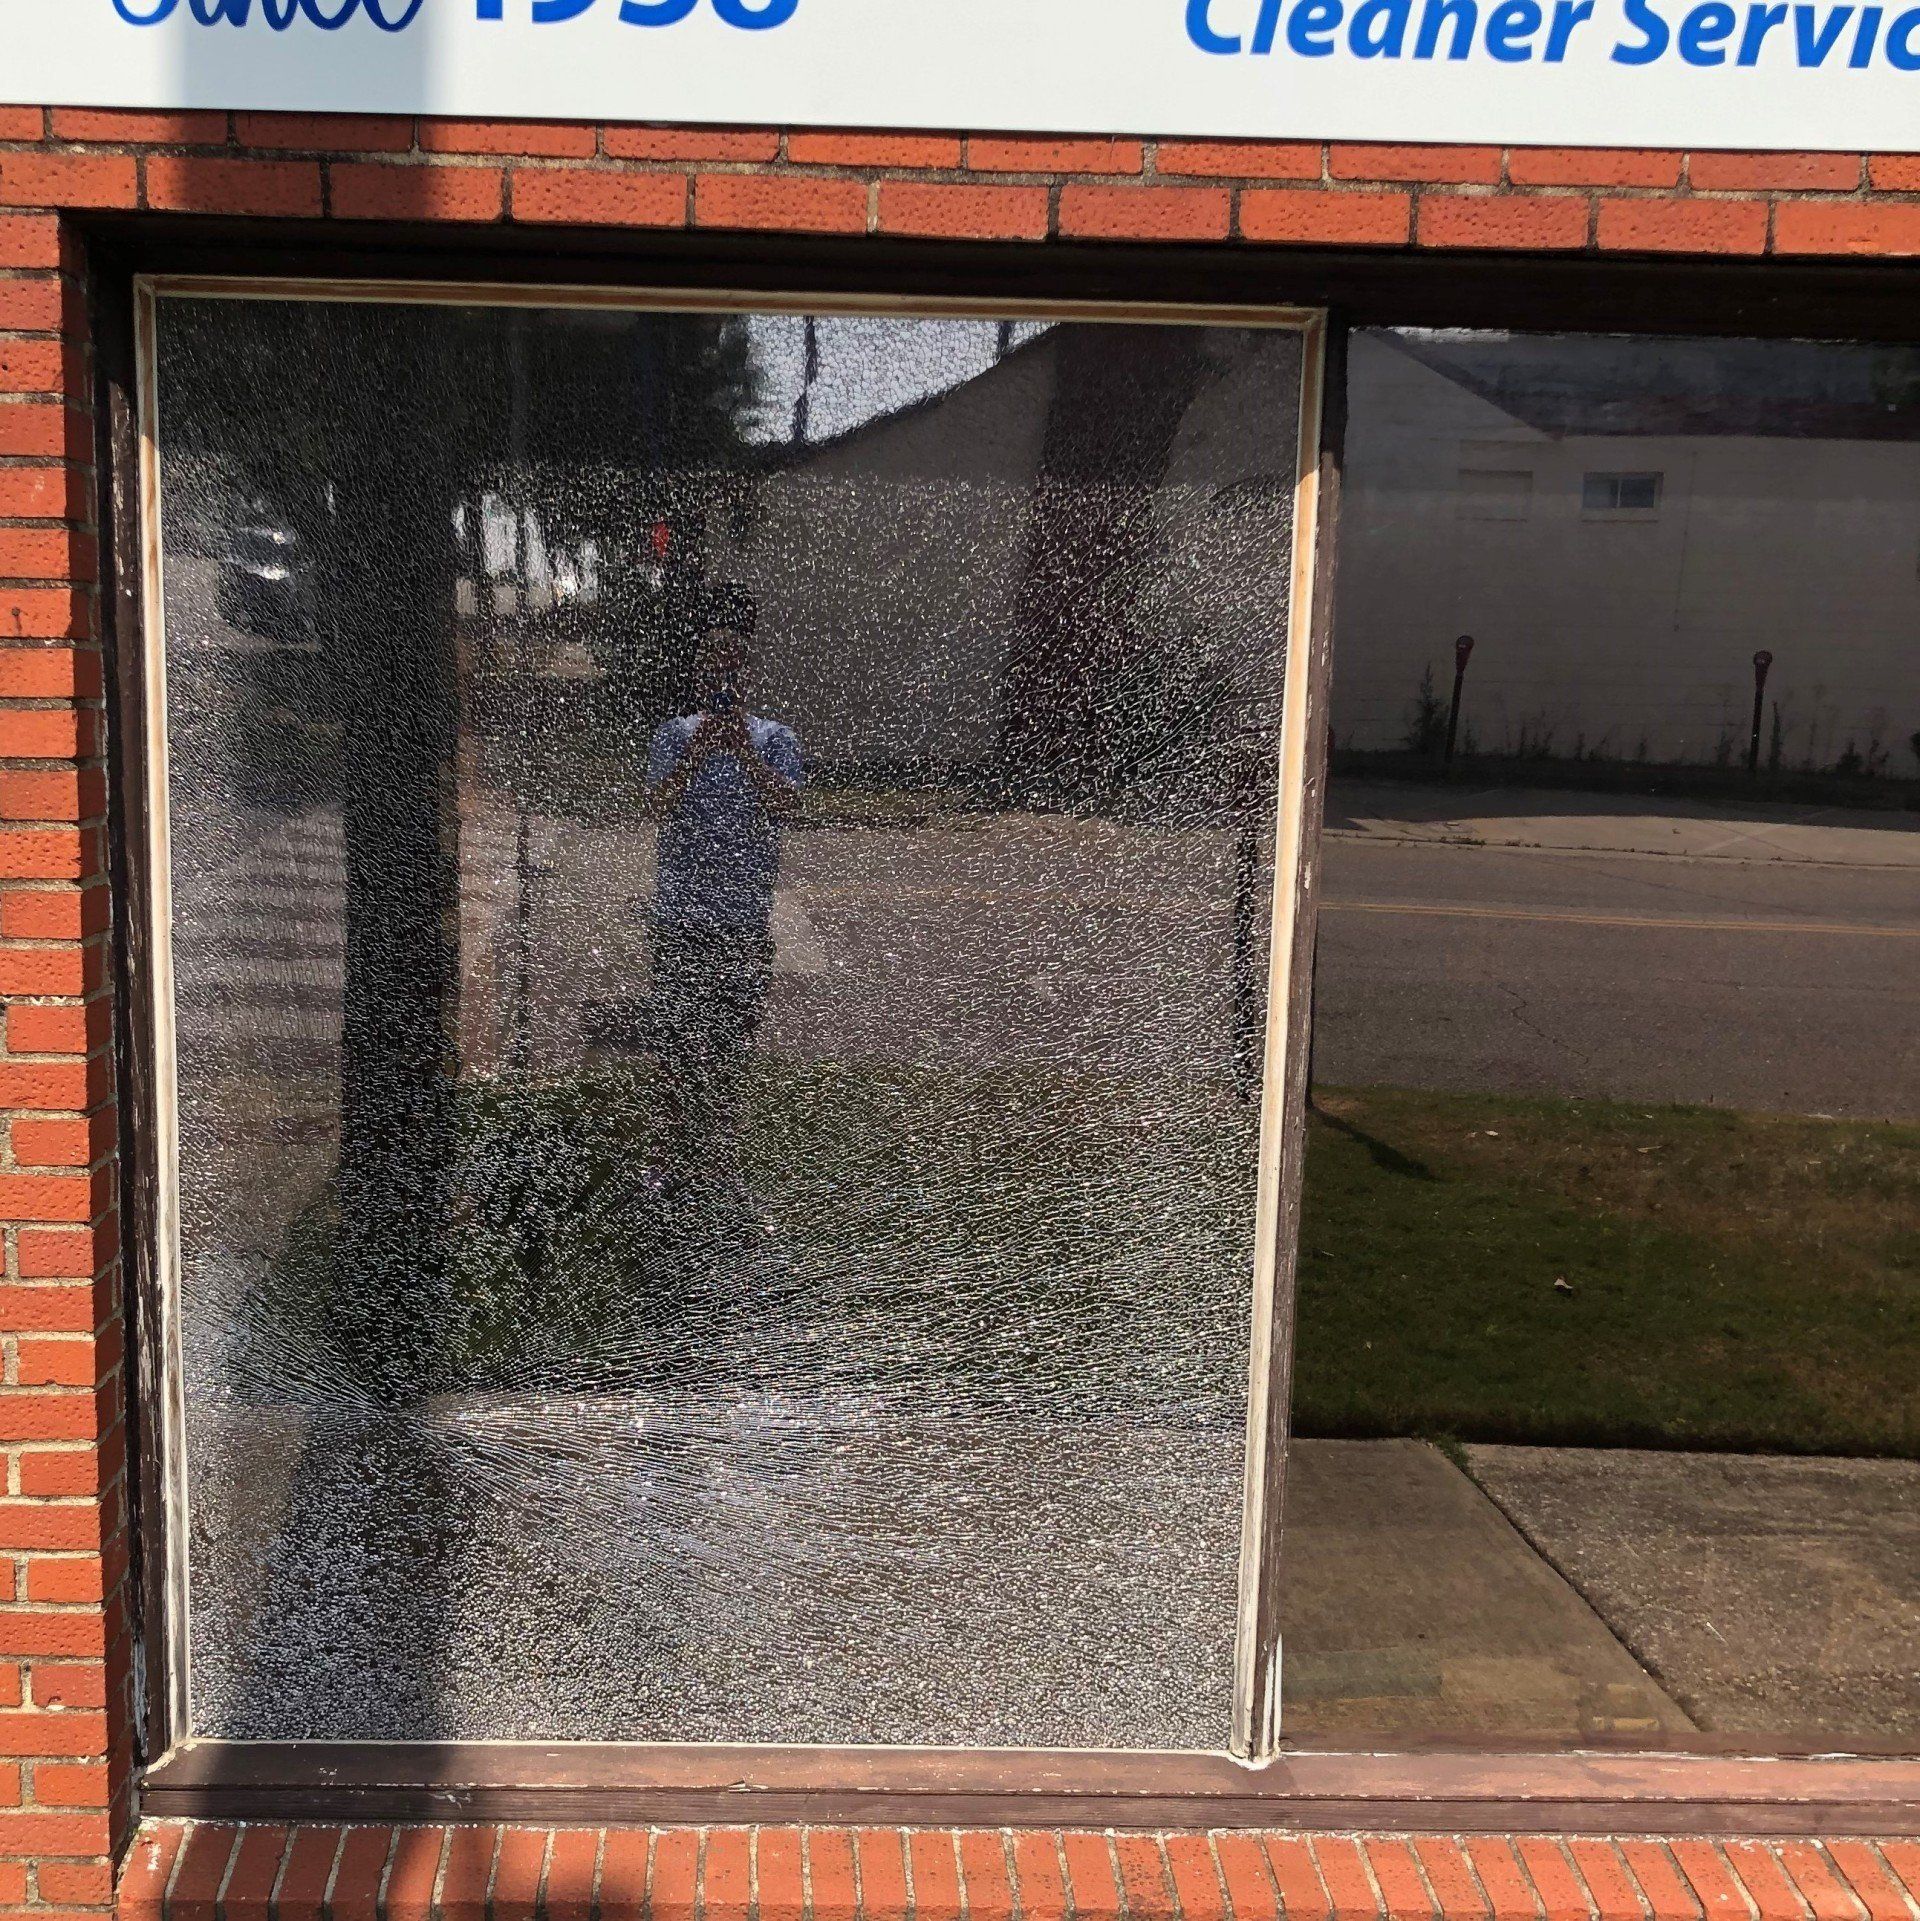 Storm proof shatter resistant - Single pane glass held together after break due to SPF Level 1 security in Alabama